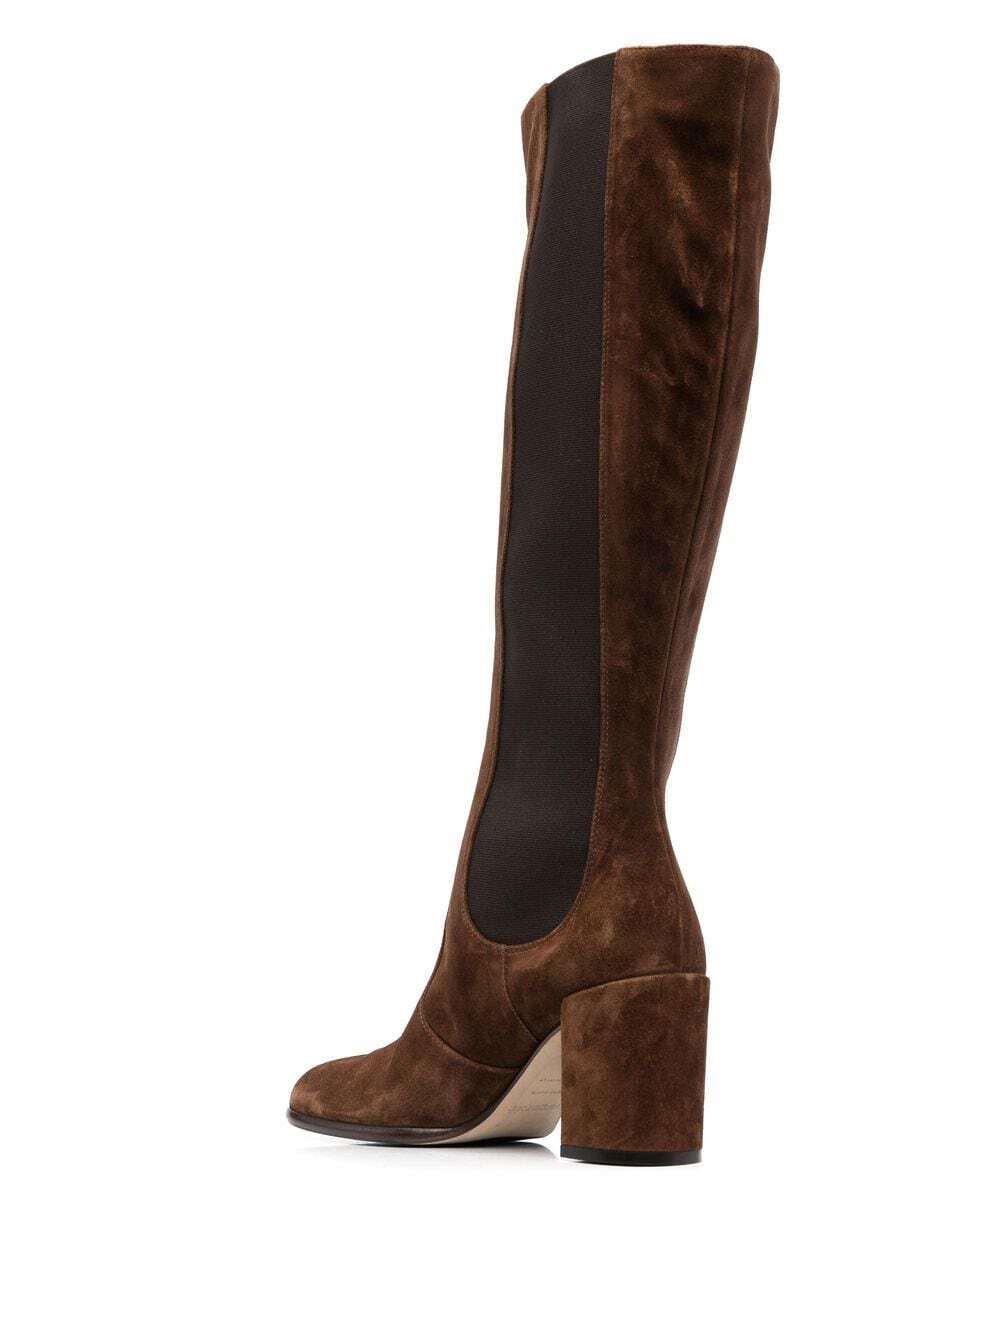 SR Aden Brown Suede Knee-High Boots - SERGIO ROSSI - Liberty Shoes Australia